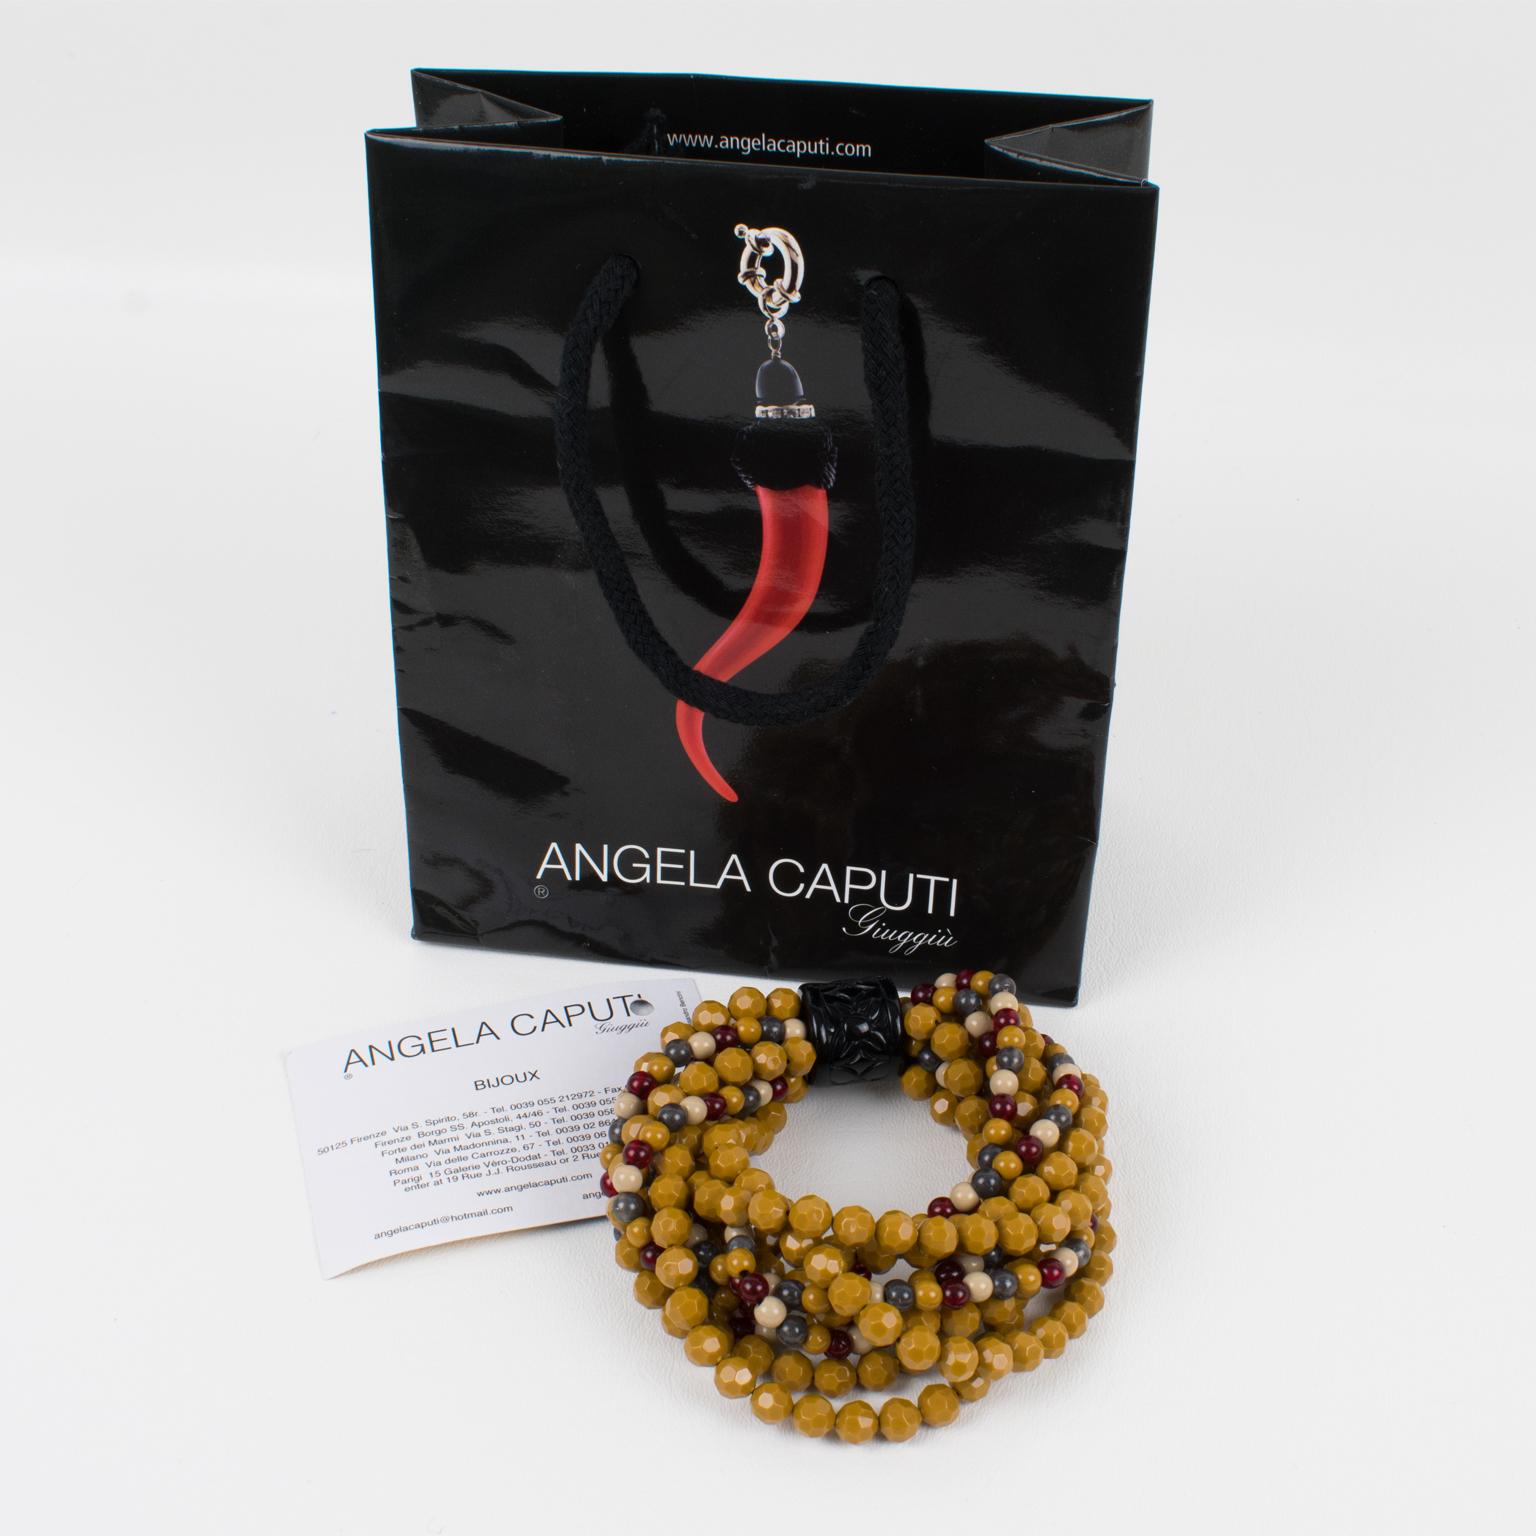 Lovely Angela Caputi, made in Italy resin beaded bracelet. Oversized multi-strand design with faceted beads in burgundy red, light beige, gray, and yellow Dijon mustard colors. B
The bracelet is built on stretch links so one size fits all. Her